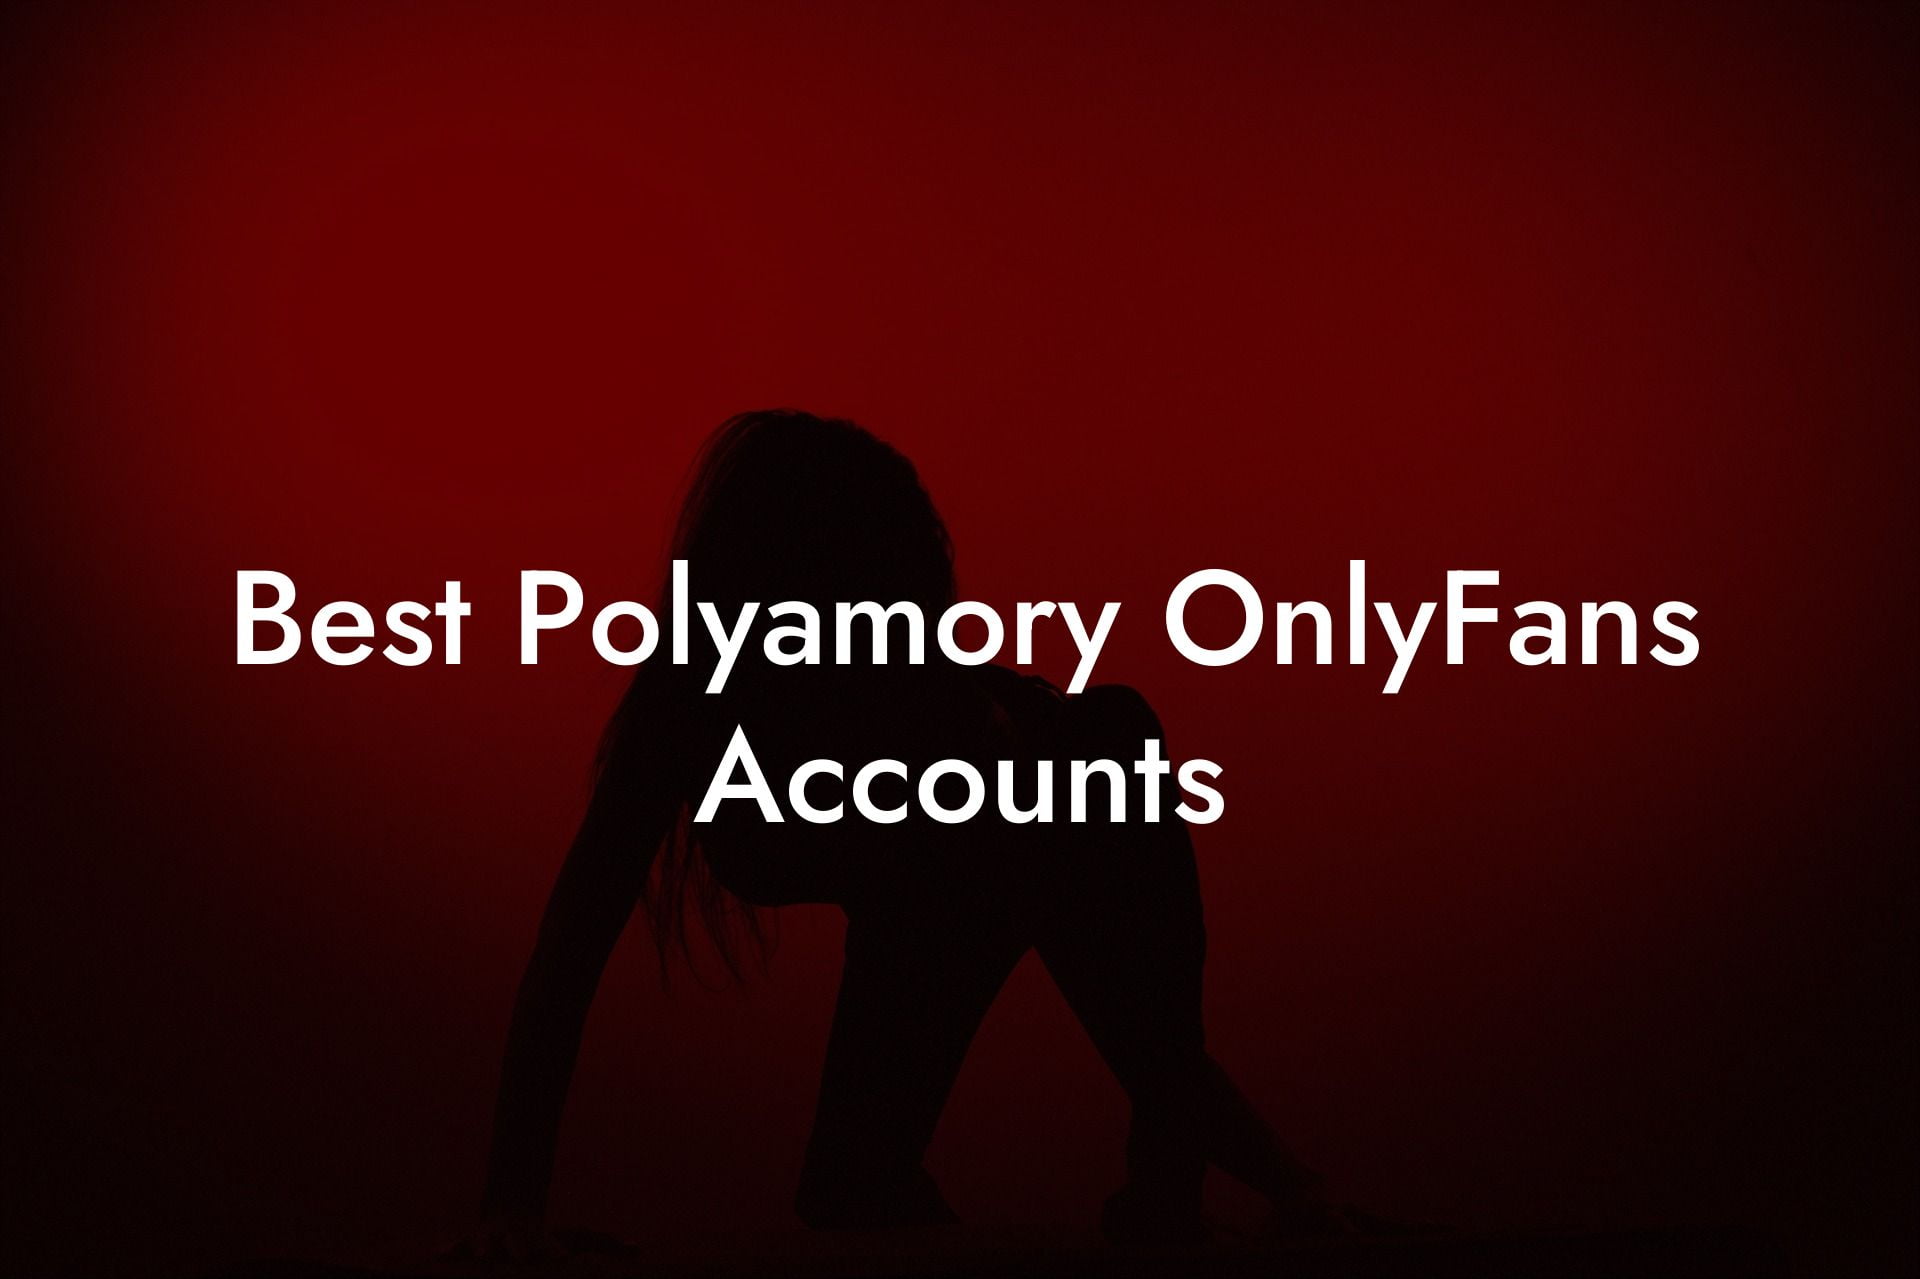 Best Polyamory OnlyFans Accounts